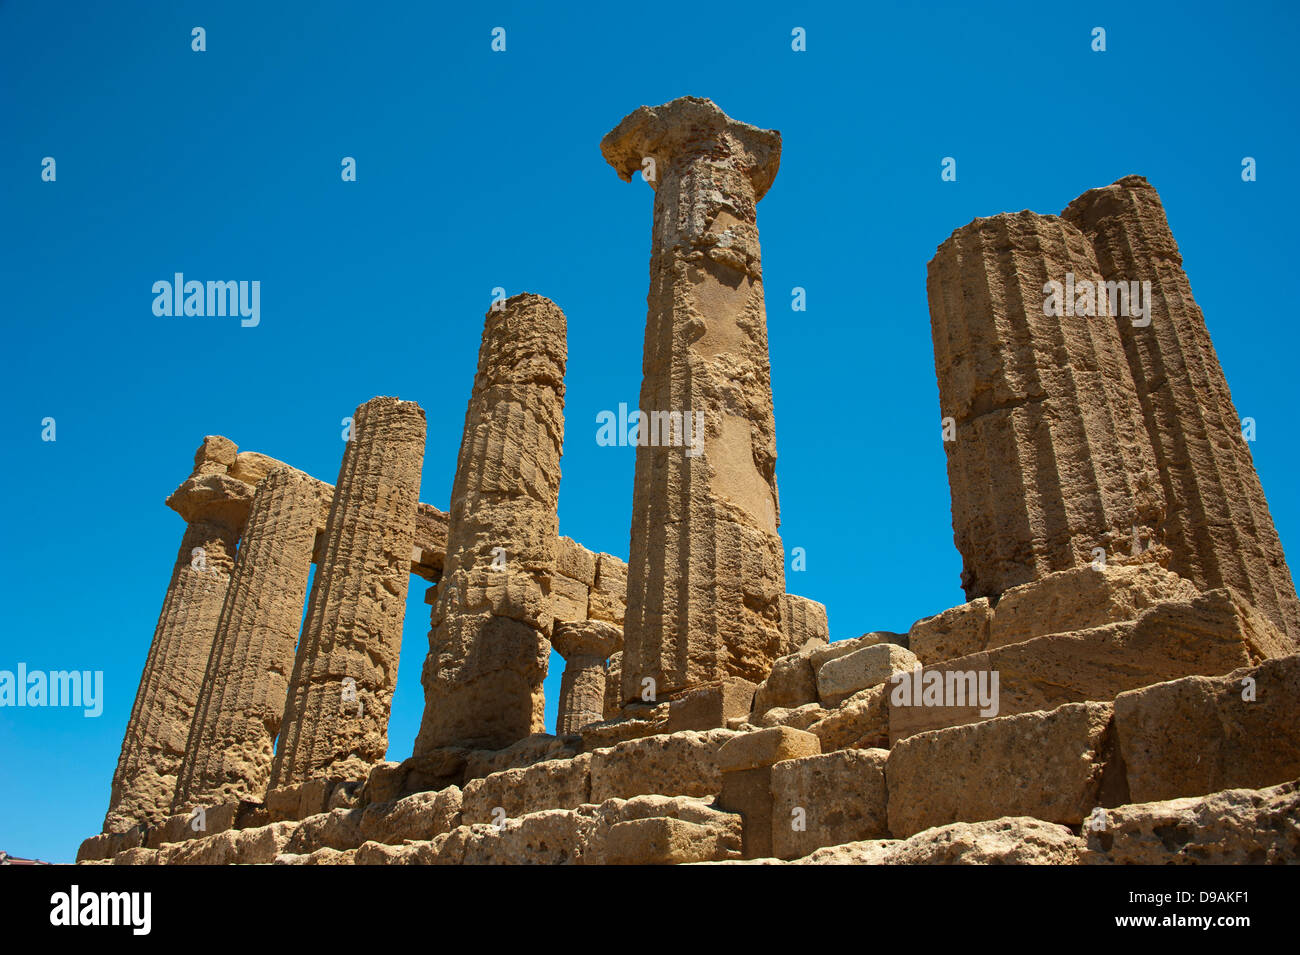 Temple of Hera Valley of Temples Agrigent Sicily Italy Tempel der Hera Tal der Tempel Agrigent Sizilien Italien Agrigento Stock Photo